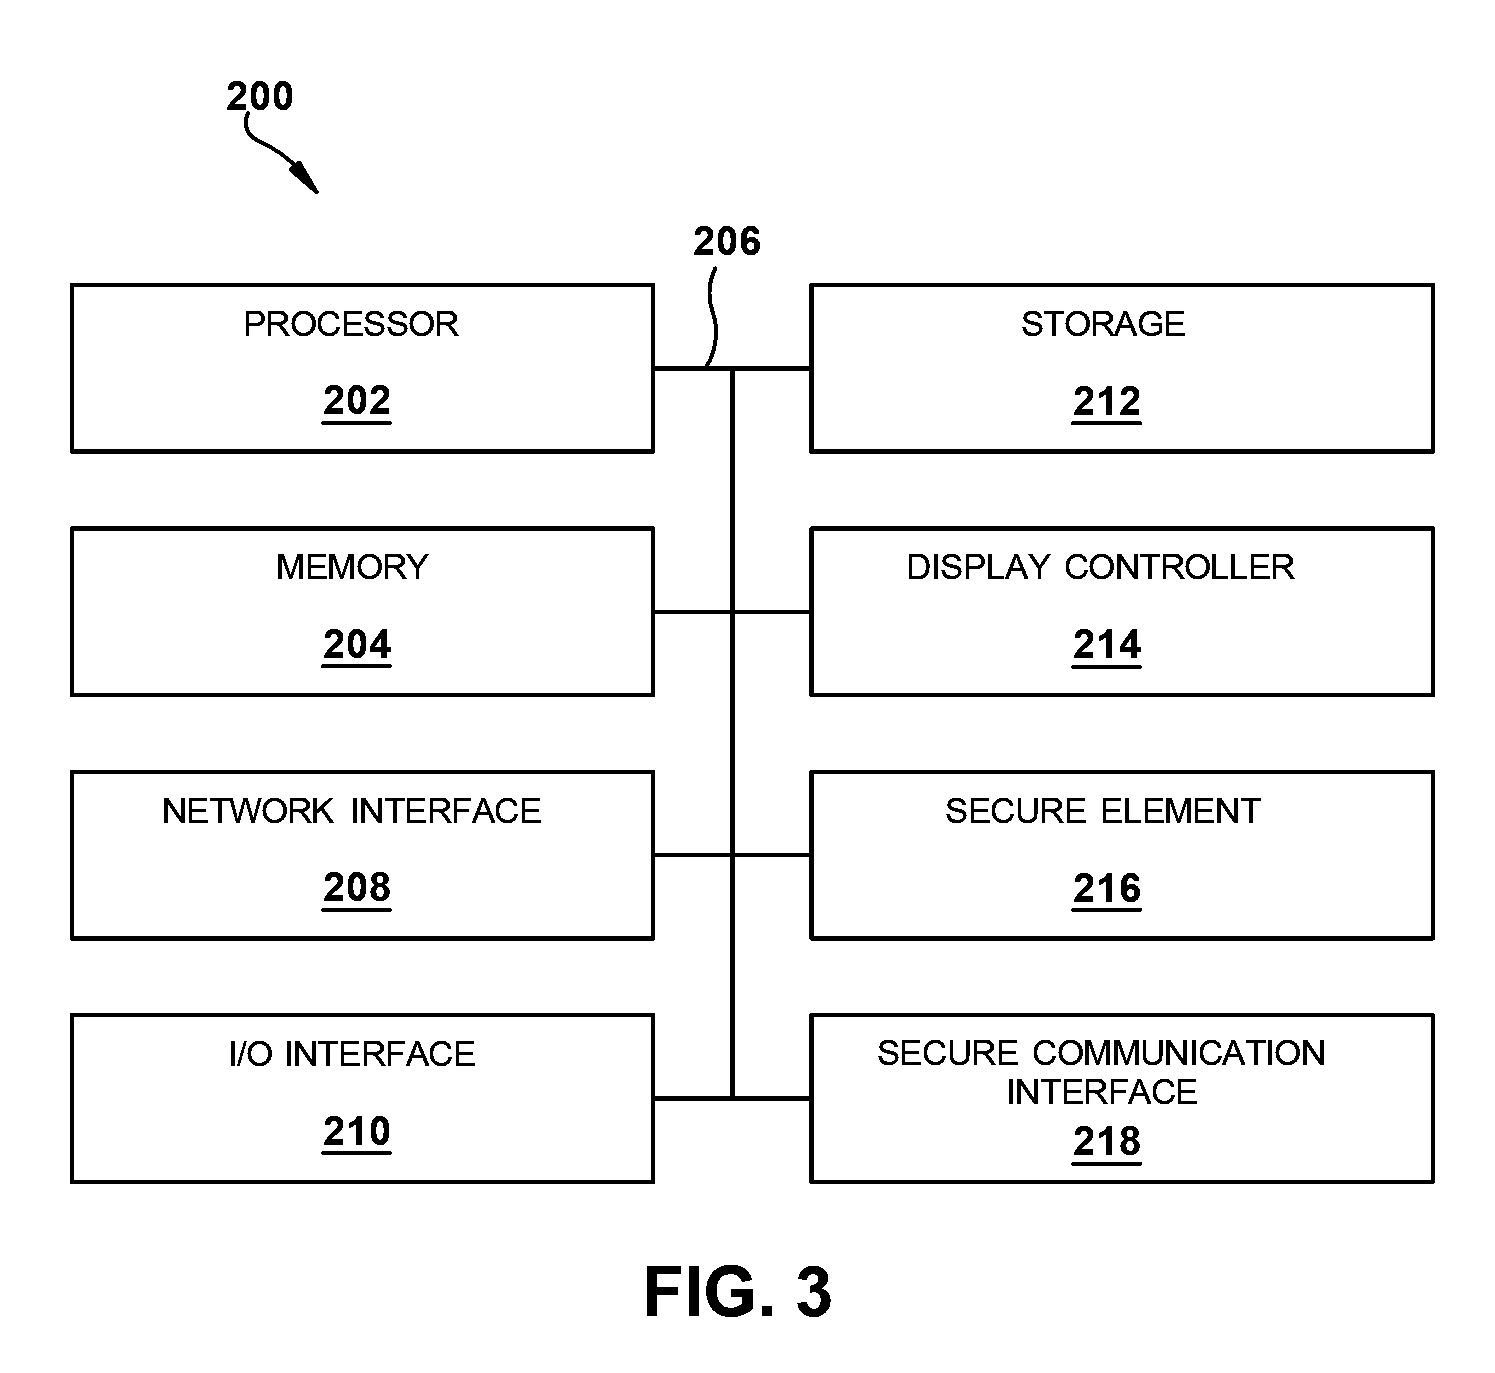 Systems and methods for convenient and secure mobile transactions